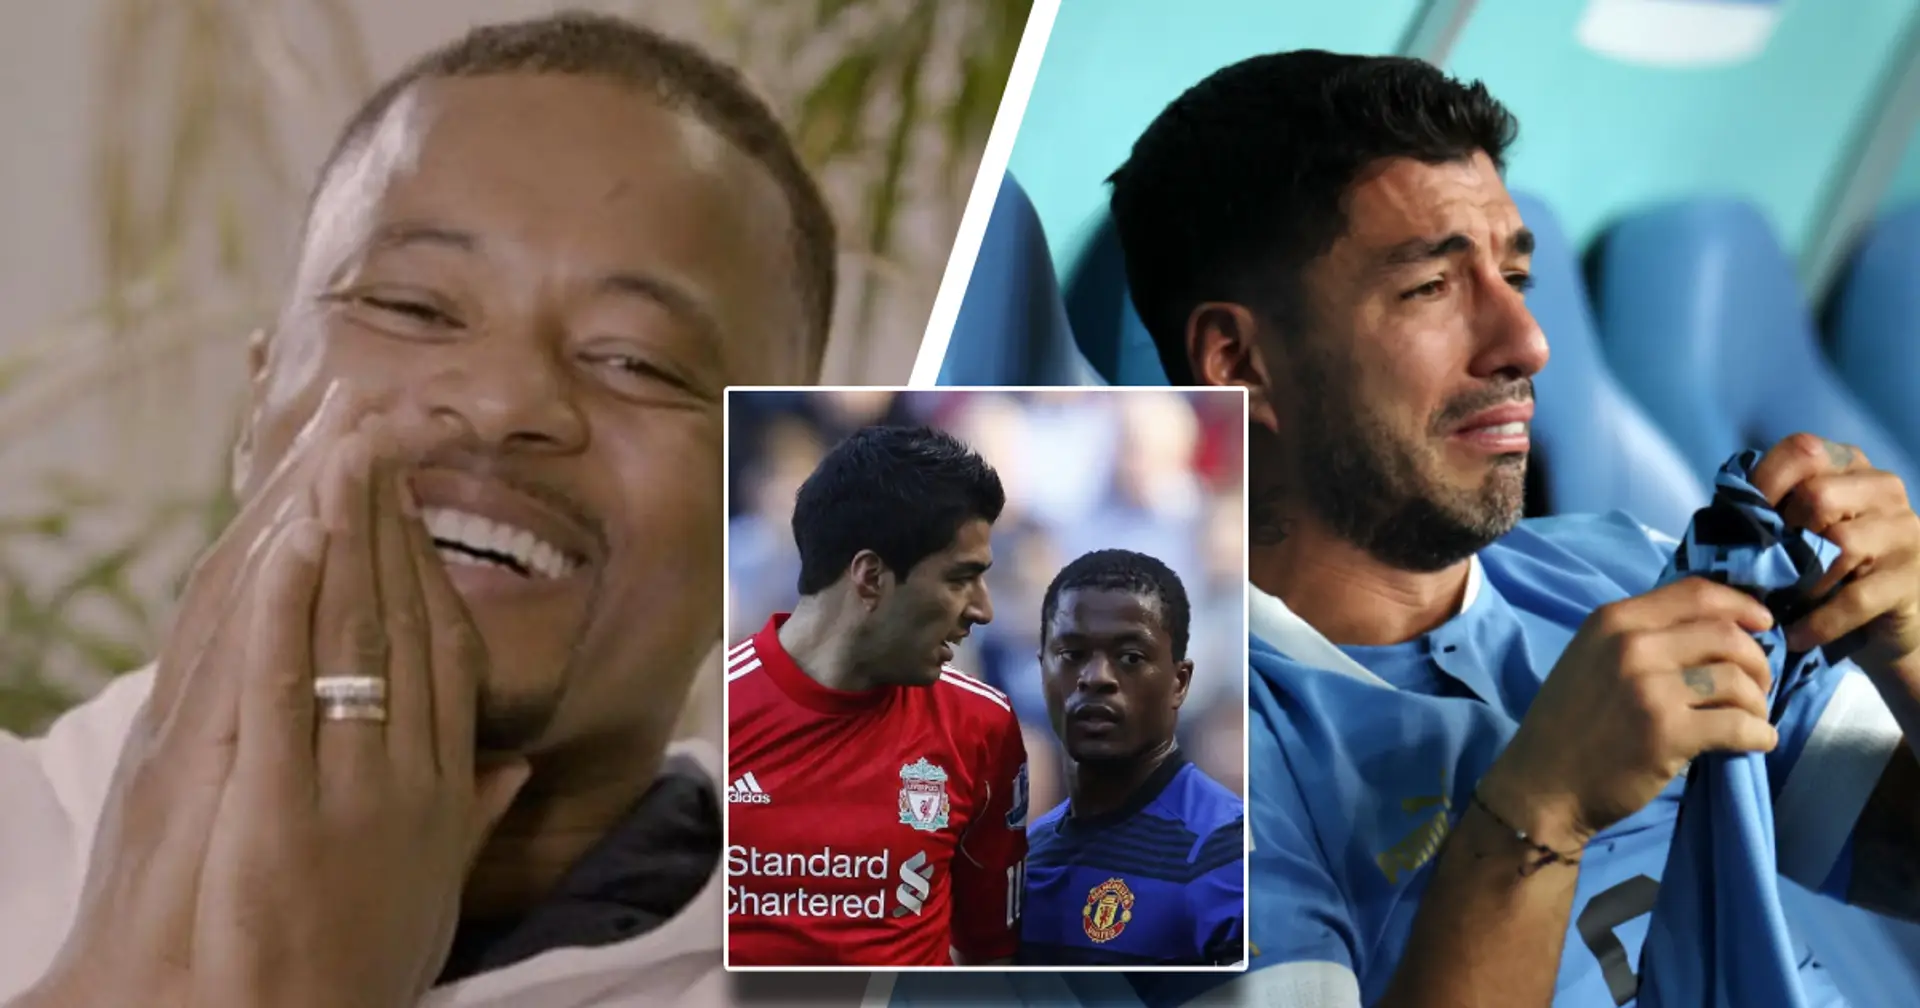 Patrice Evra 'likes' photo of Luis Suarez crying after Uruguay crashes out of World Cup